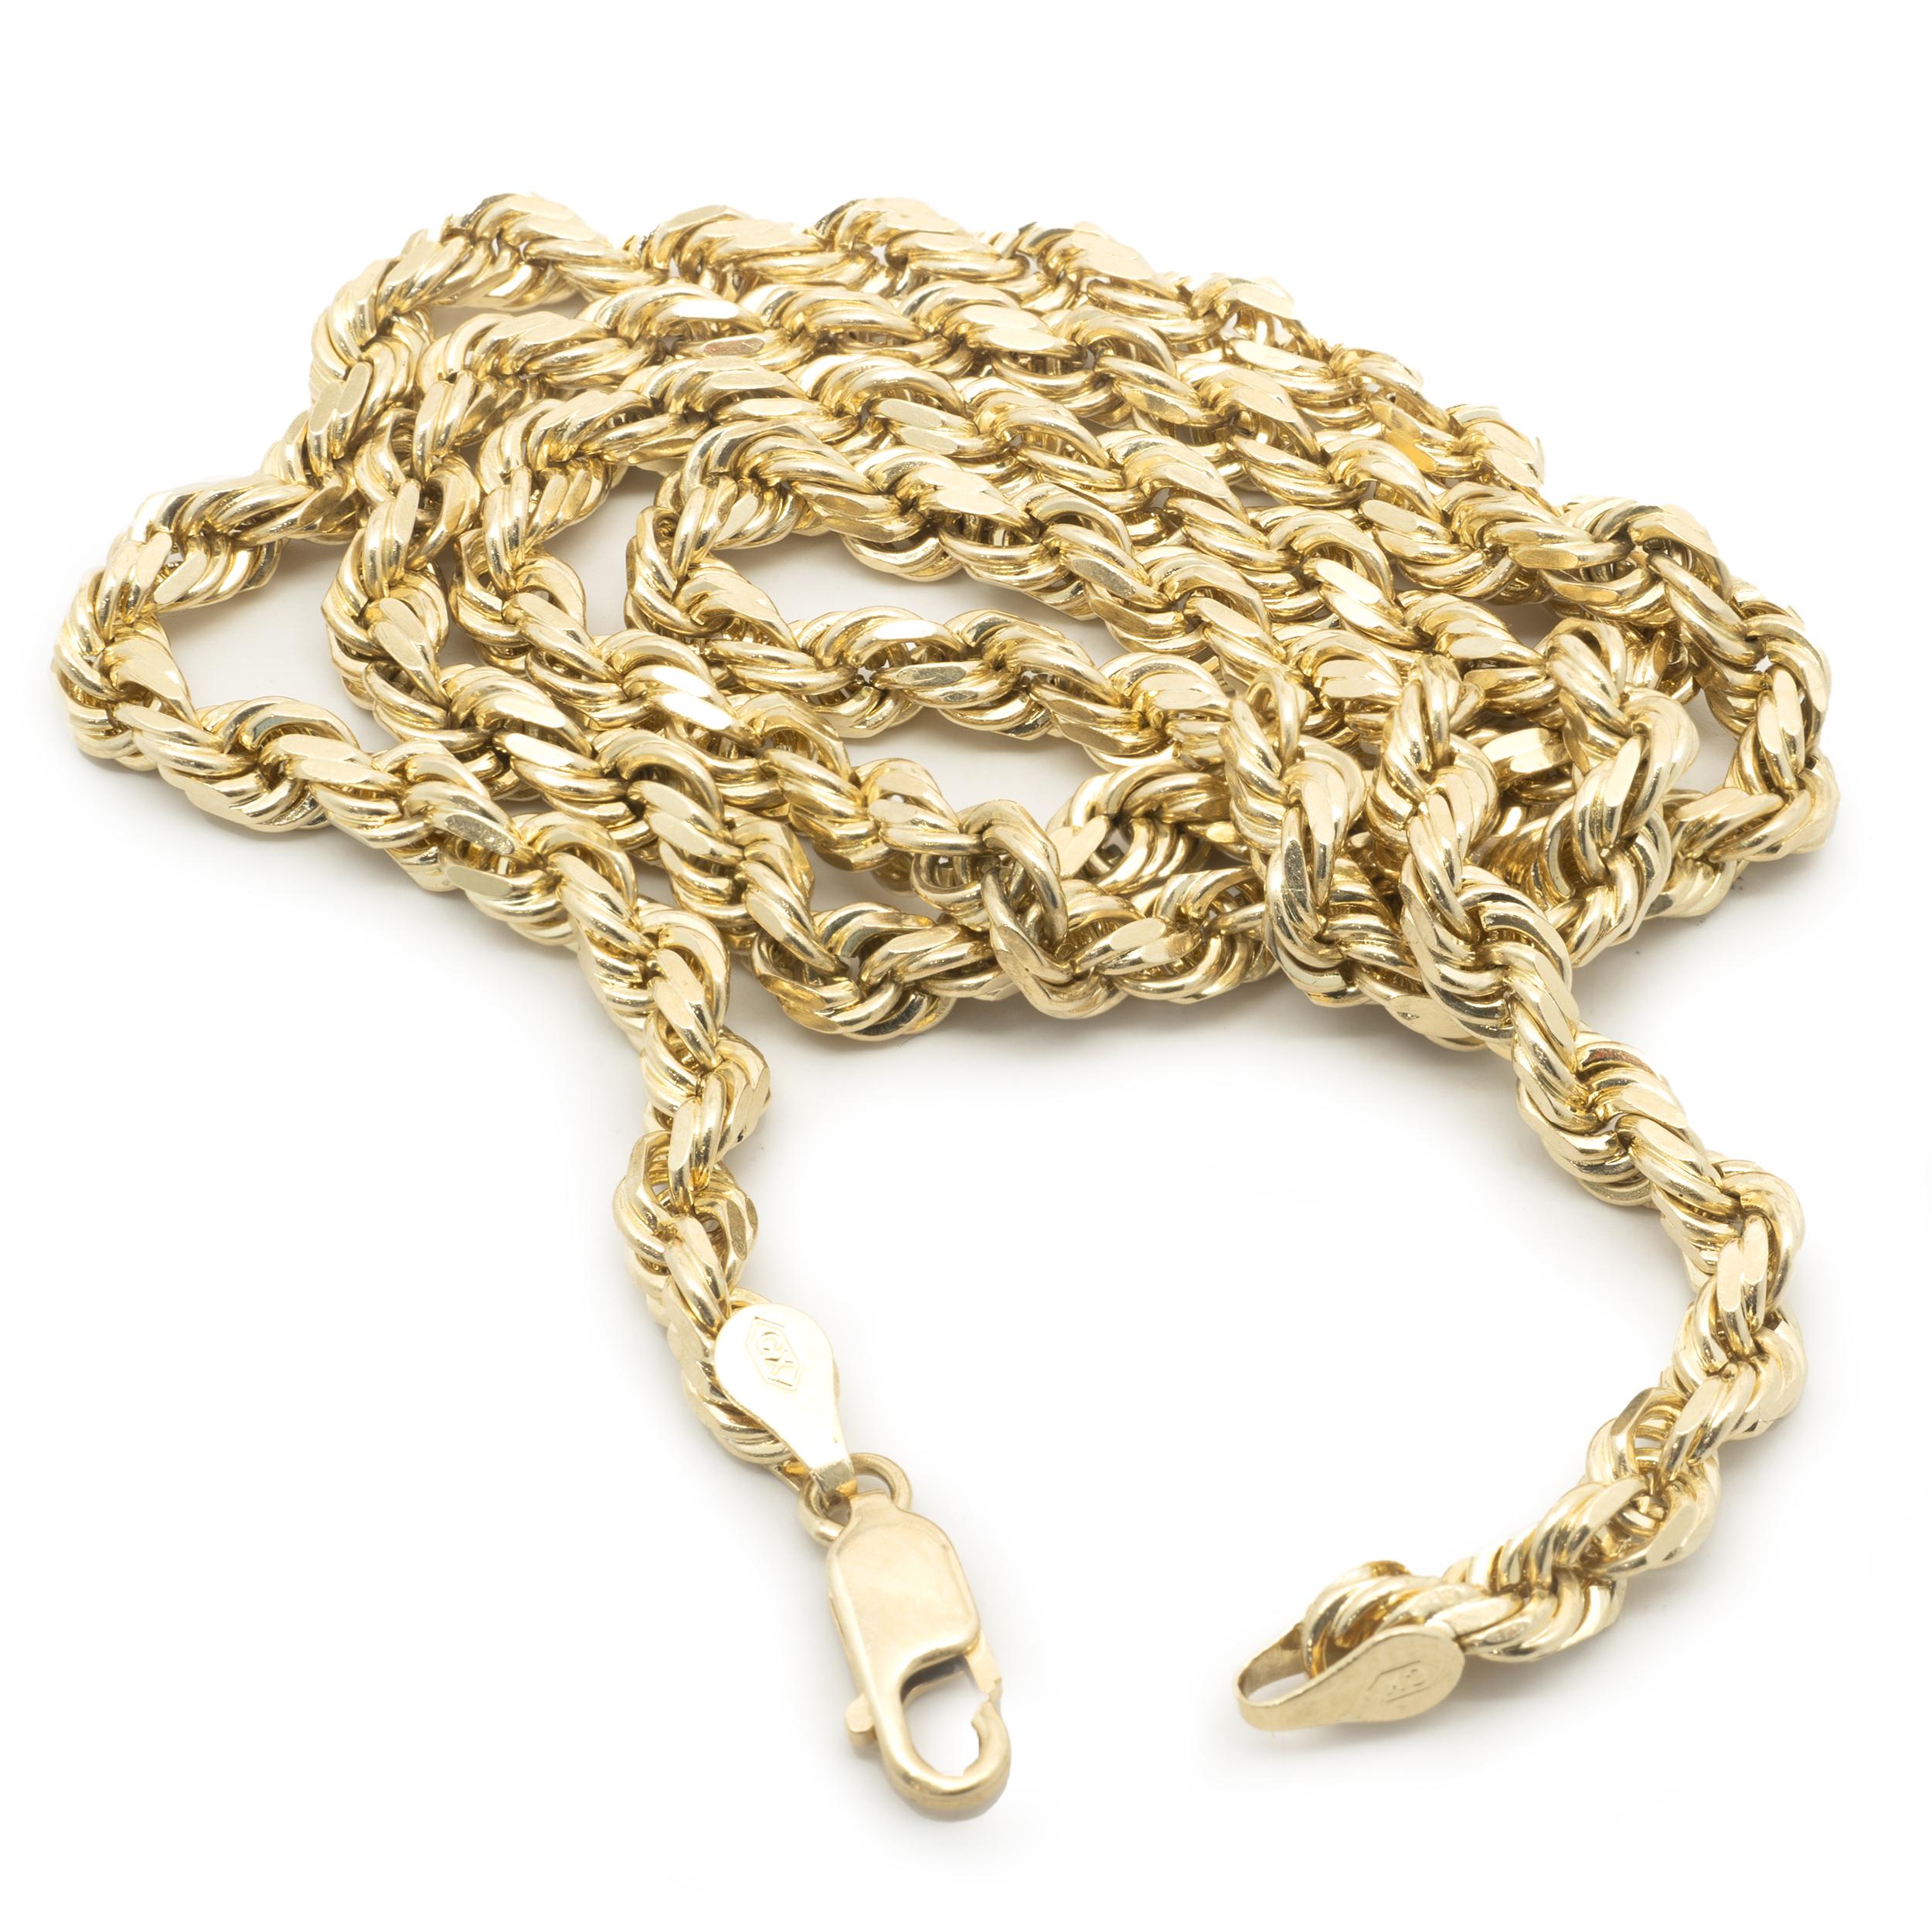 Material: 10K yellow gold
Dimensions: necklace measures 21-inches in length, 4.50mm wide
Weight: 32.55 grams
